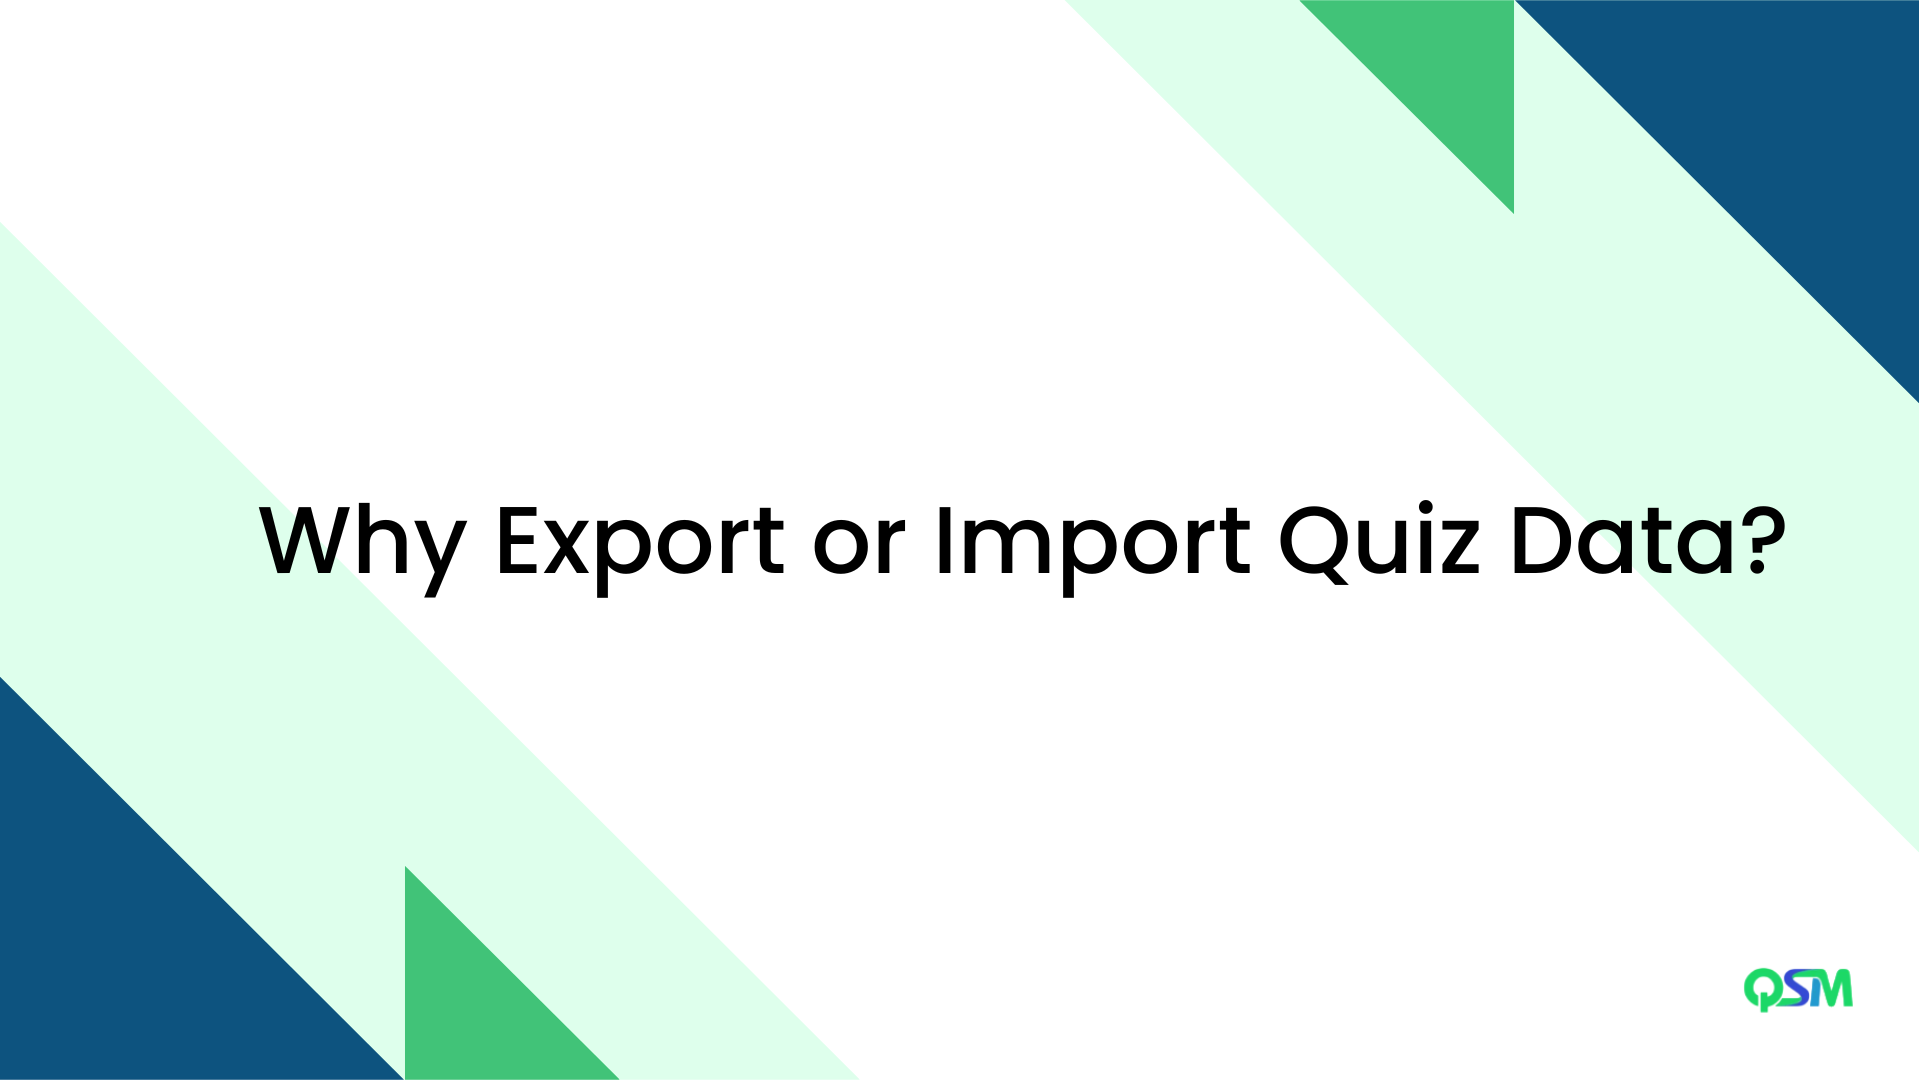 Why Export or Import Quiz Data?